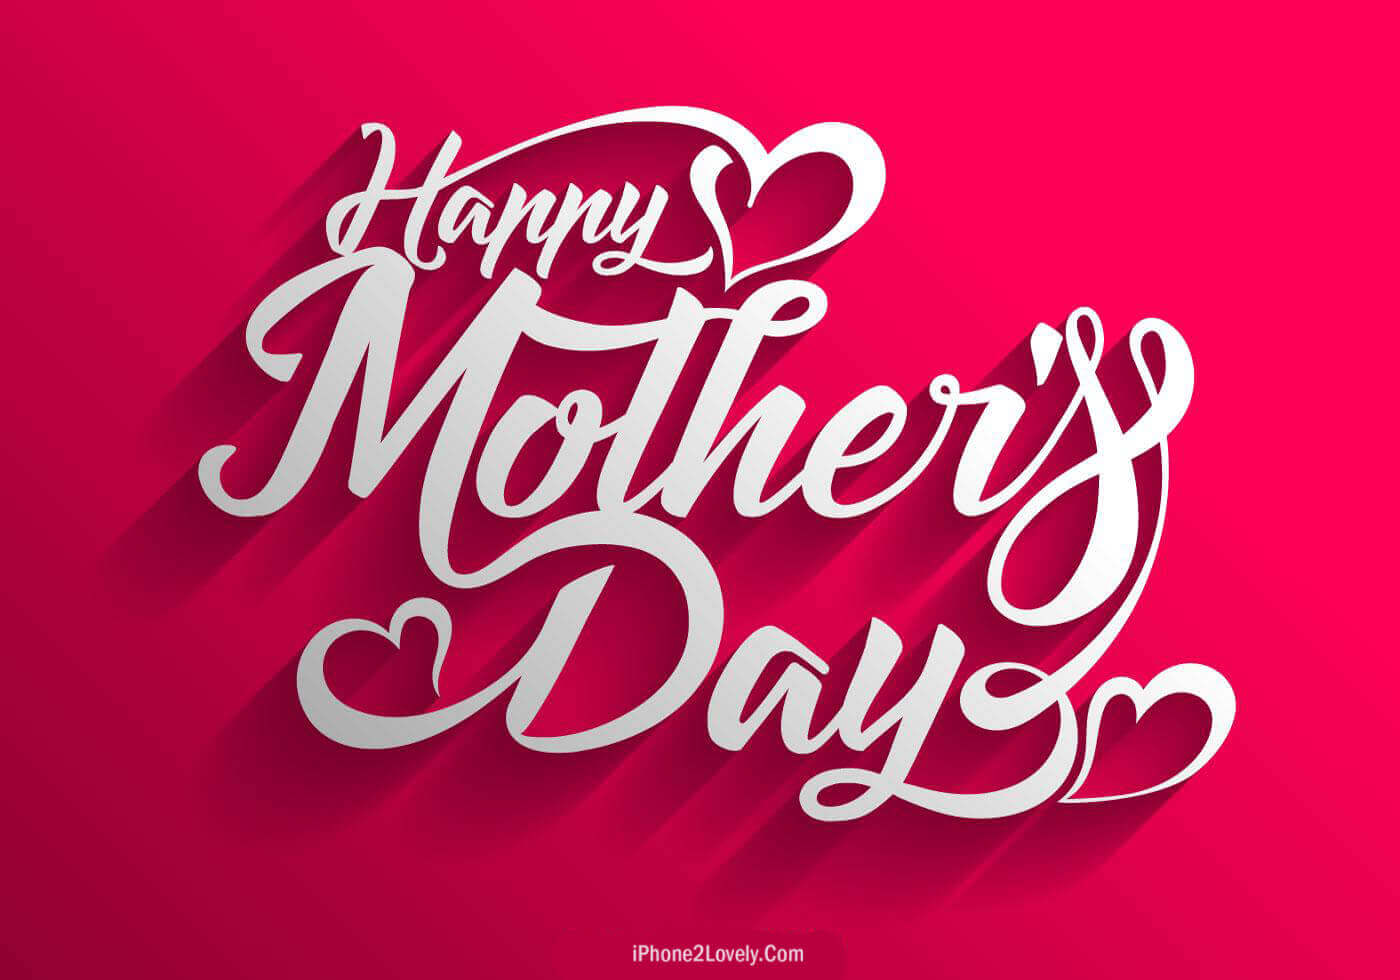 Happy Mothers Day Images - Happy Mothers Day Vectors - HD Wallpaper 